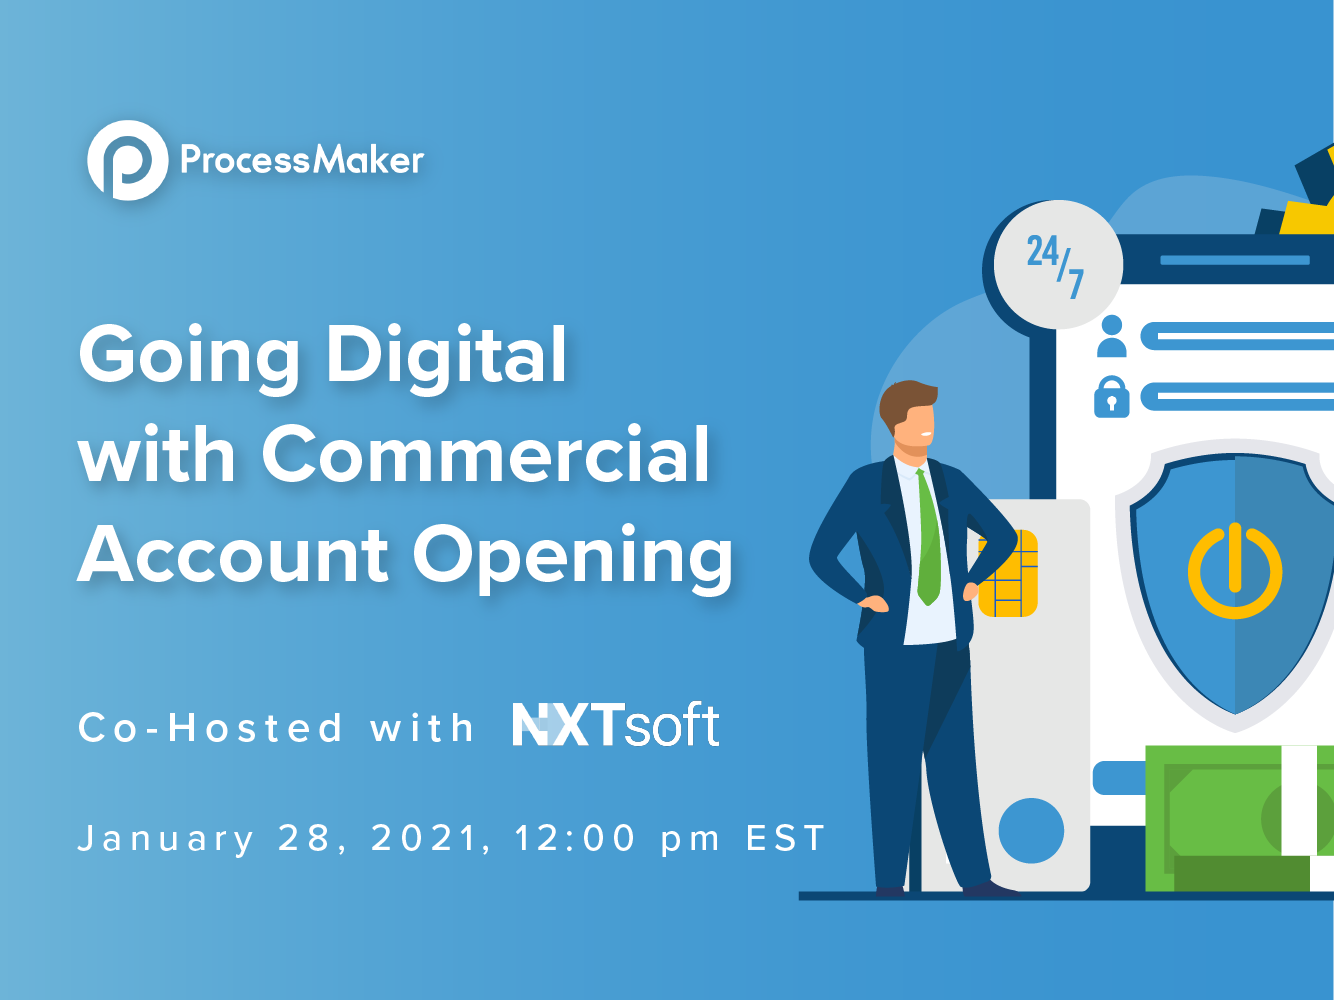 Going Digital with Commercial Account Opening